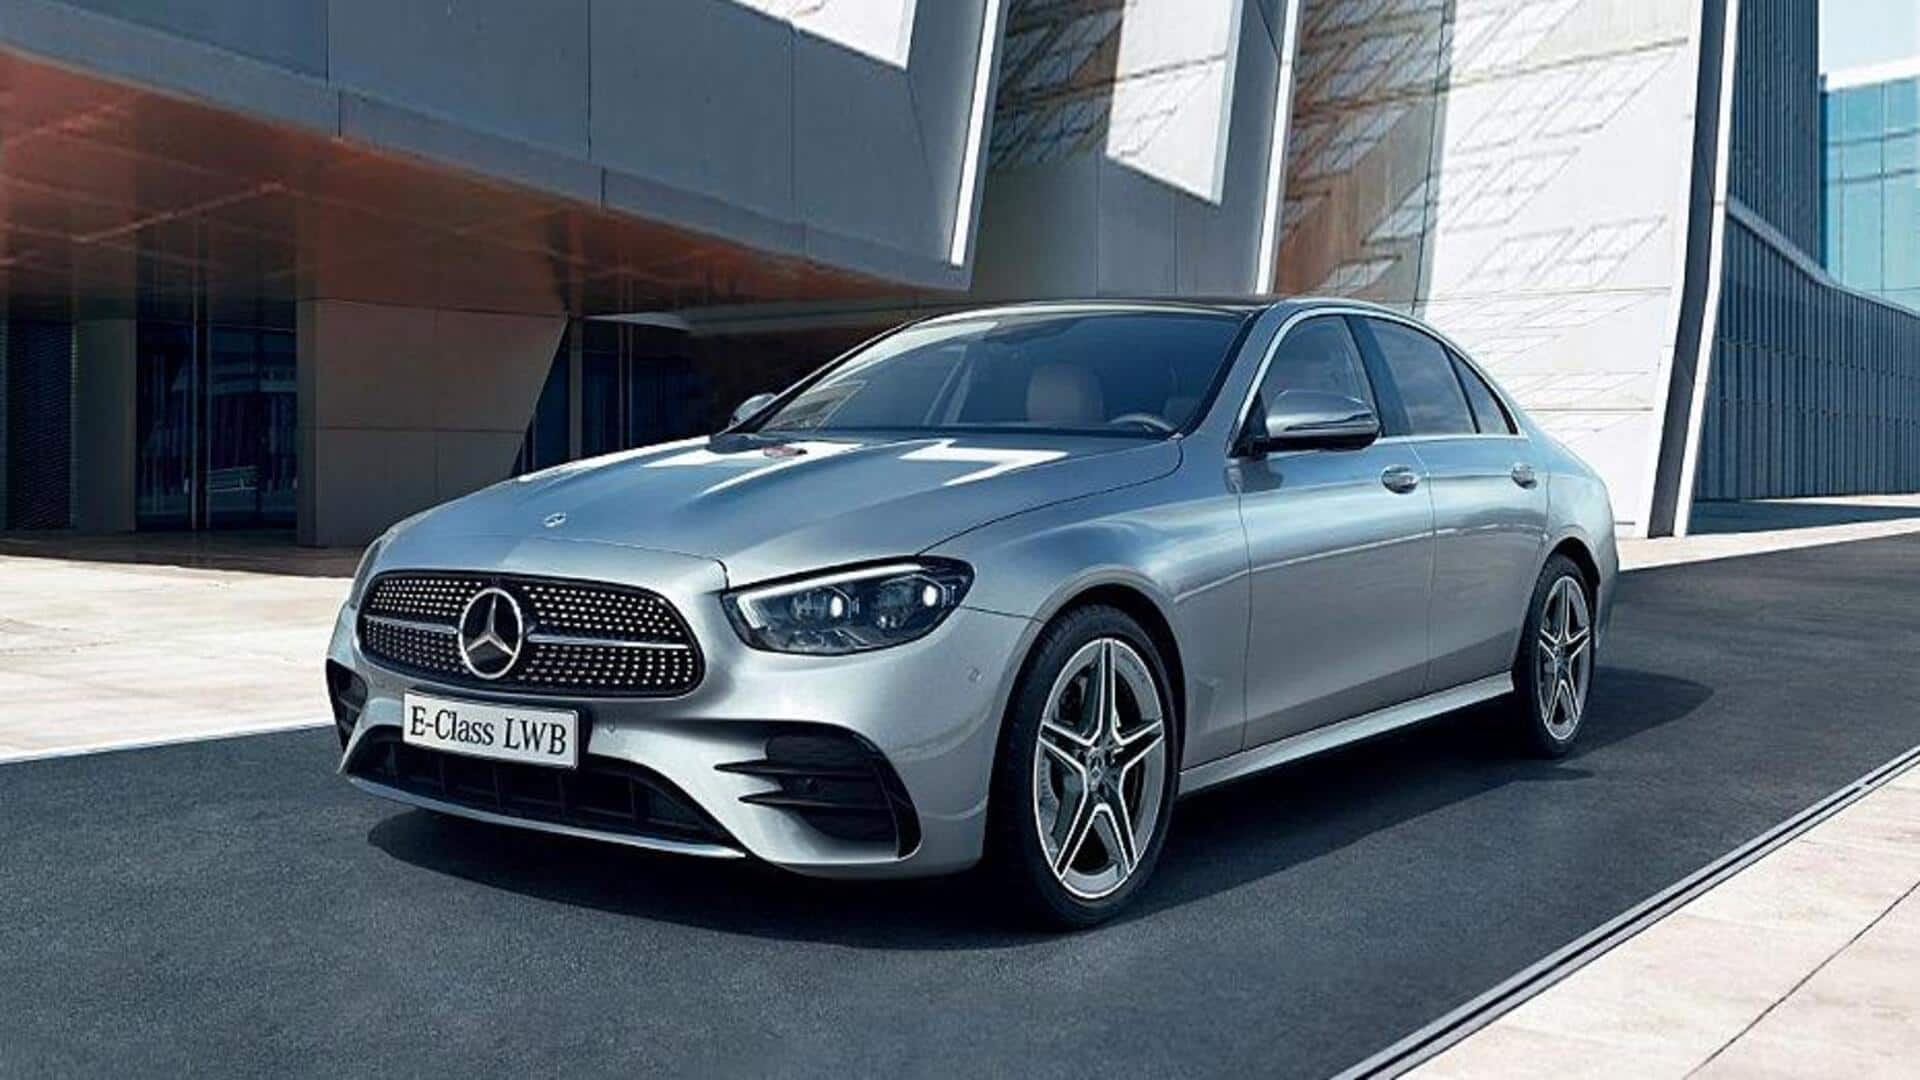 Mercedes-Benz E-Class LWB to be launched in India this year